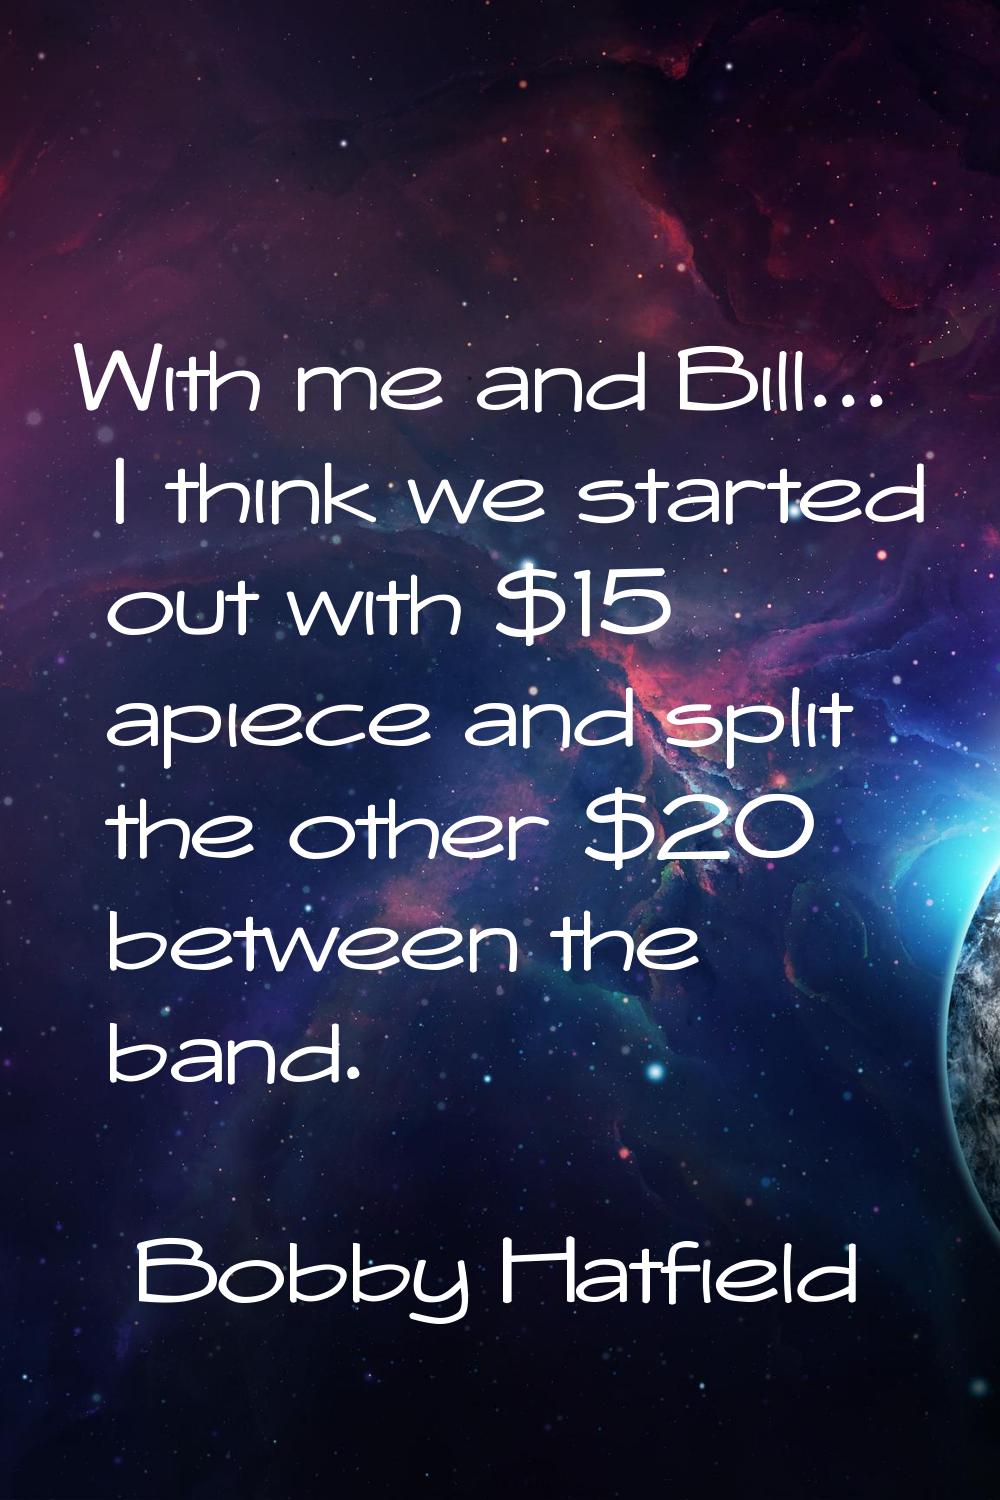 With me and Bill... I think we started out with $15 apiece and split the other $20 between the band